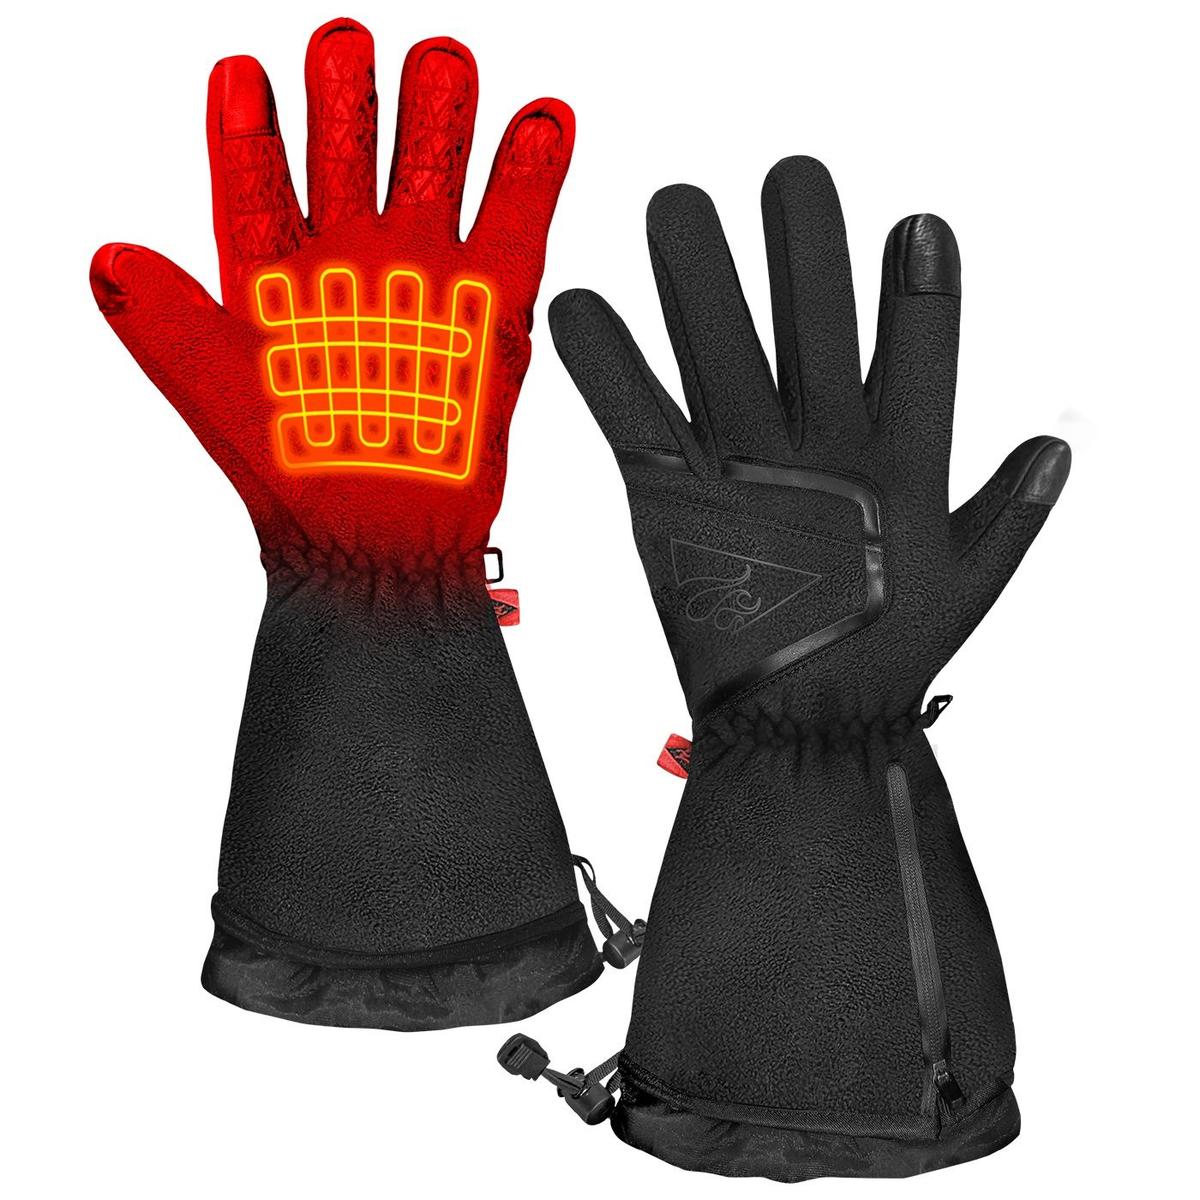 Tactical Leather Heated Gloves - Help keep your hands warm - Volt Heat